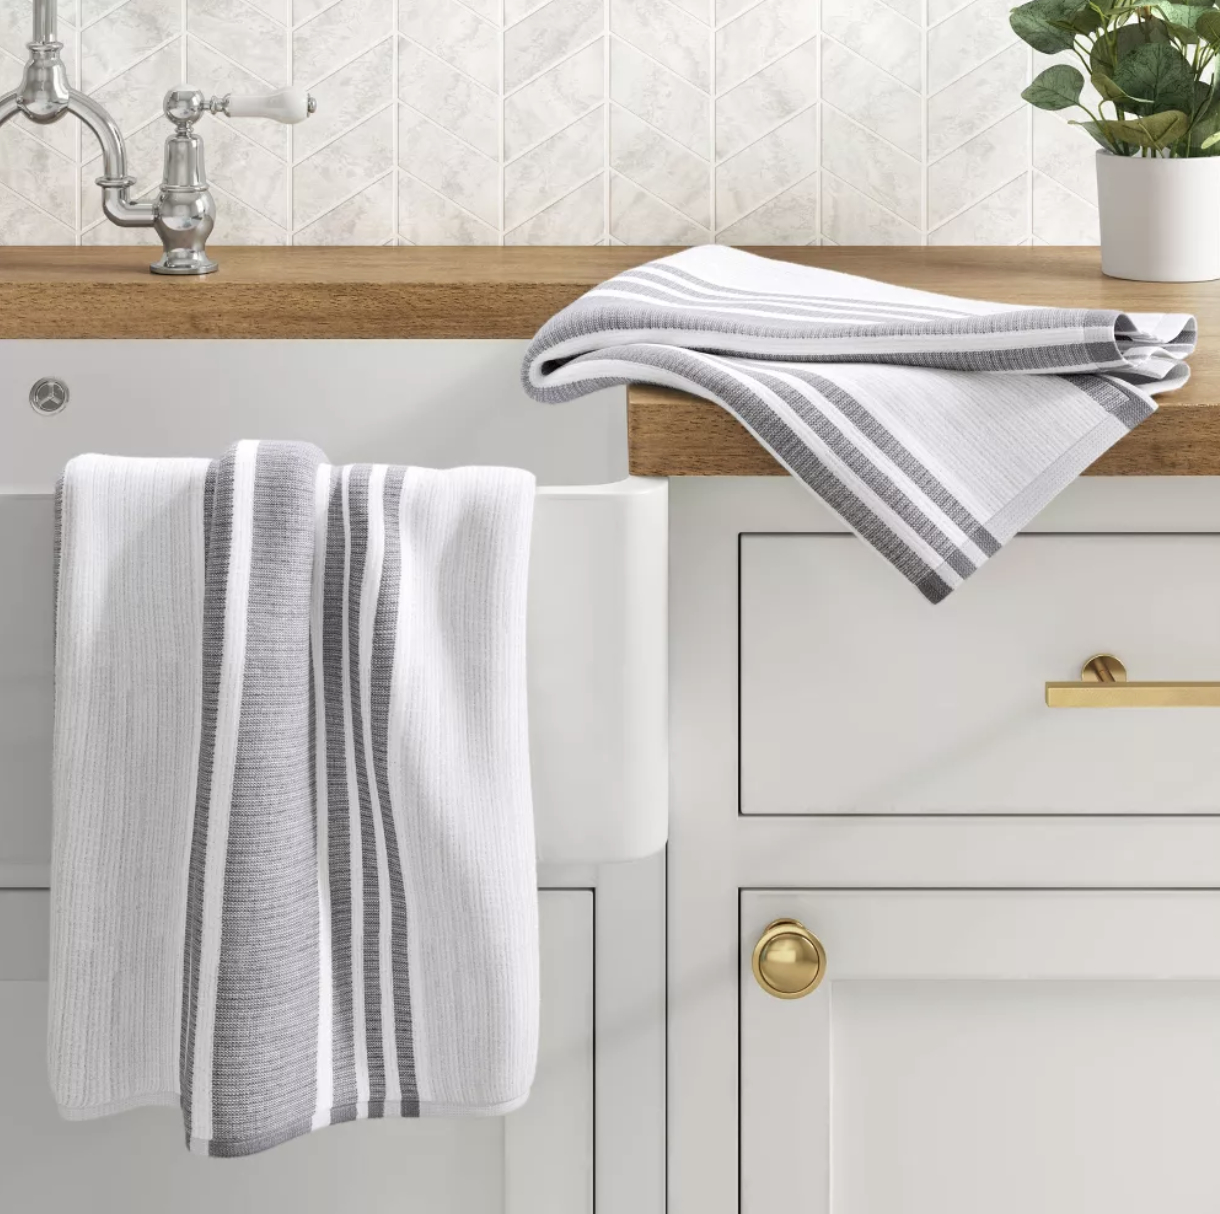 A set of grey and white kitchen towels